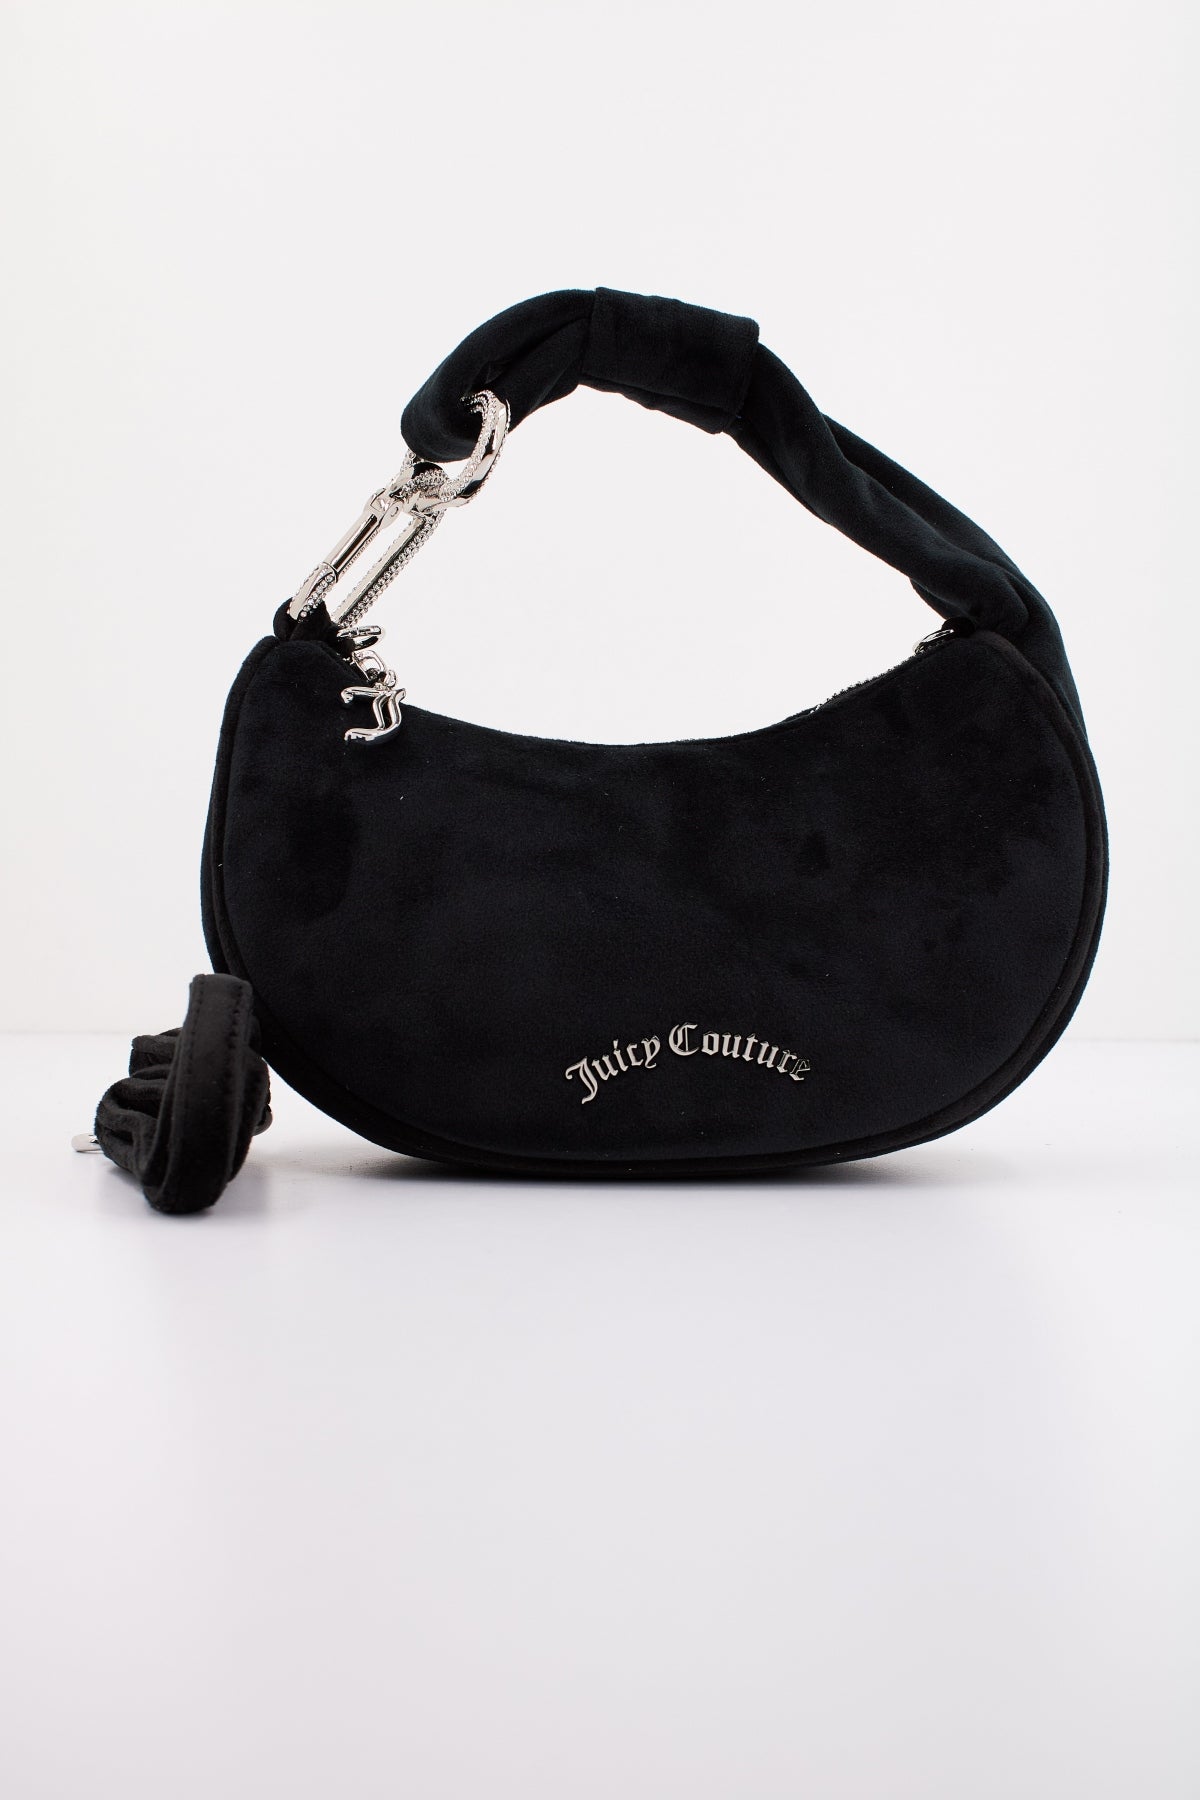 JUICY COUTURE BLOSSOM SMALL HOBO en color NEGRO  (2)